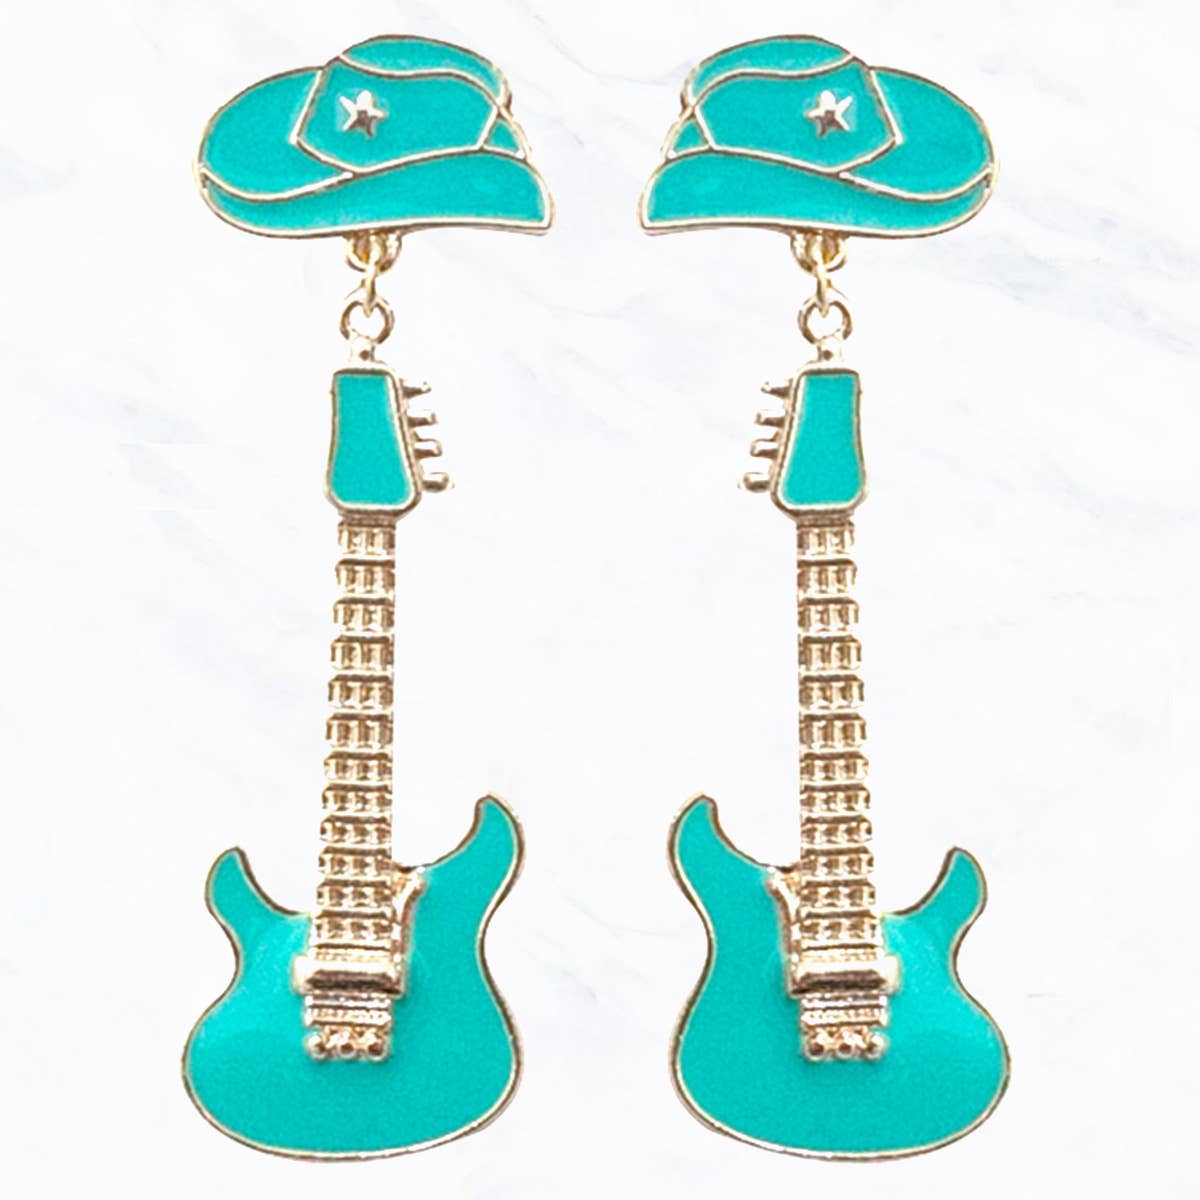 Turquoise Country Style Hat and Guitar Drop Earrings